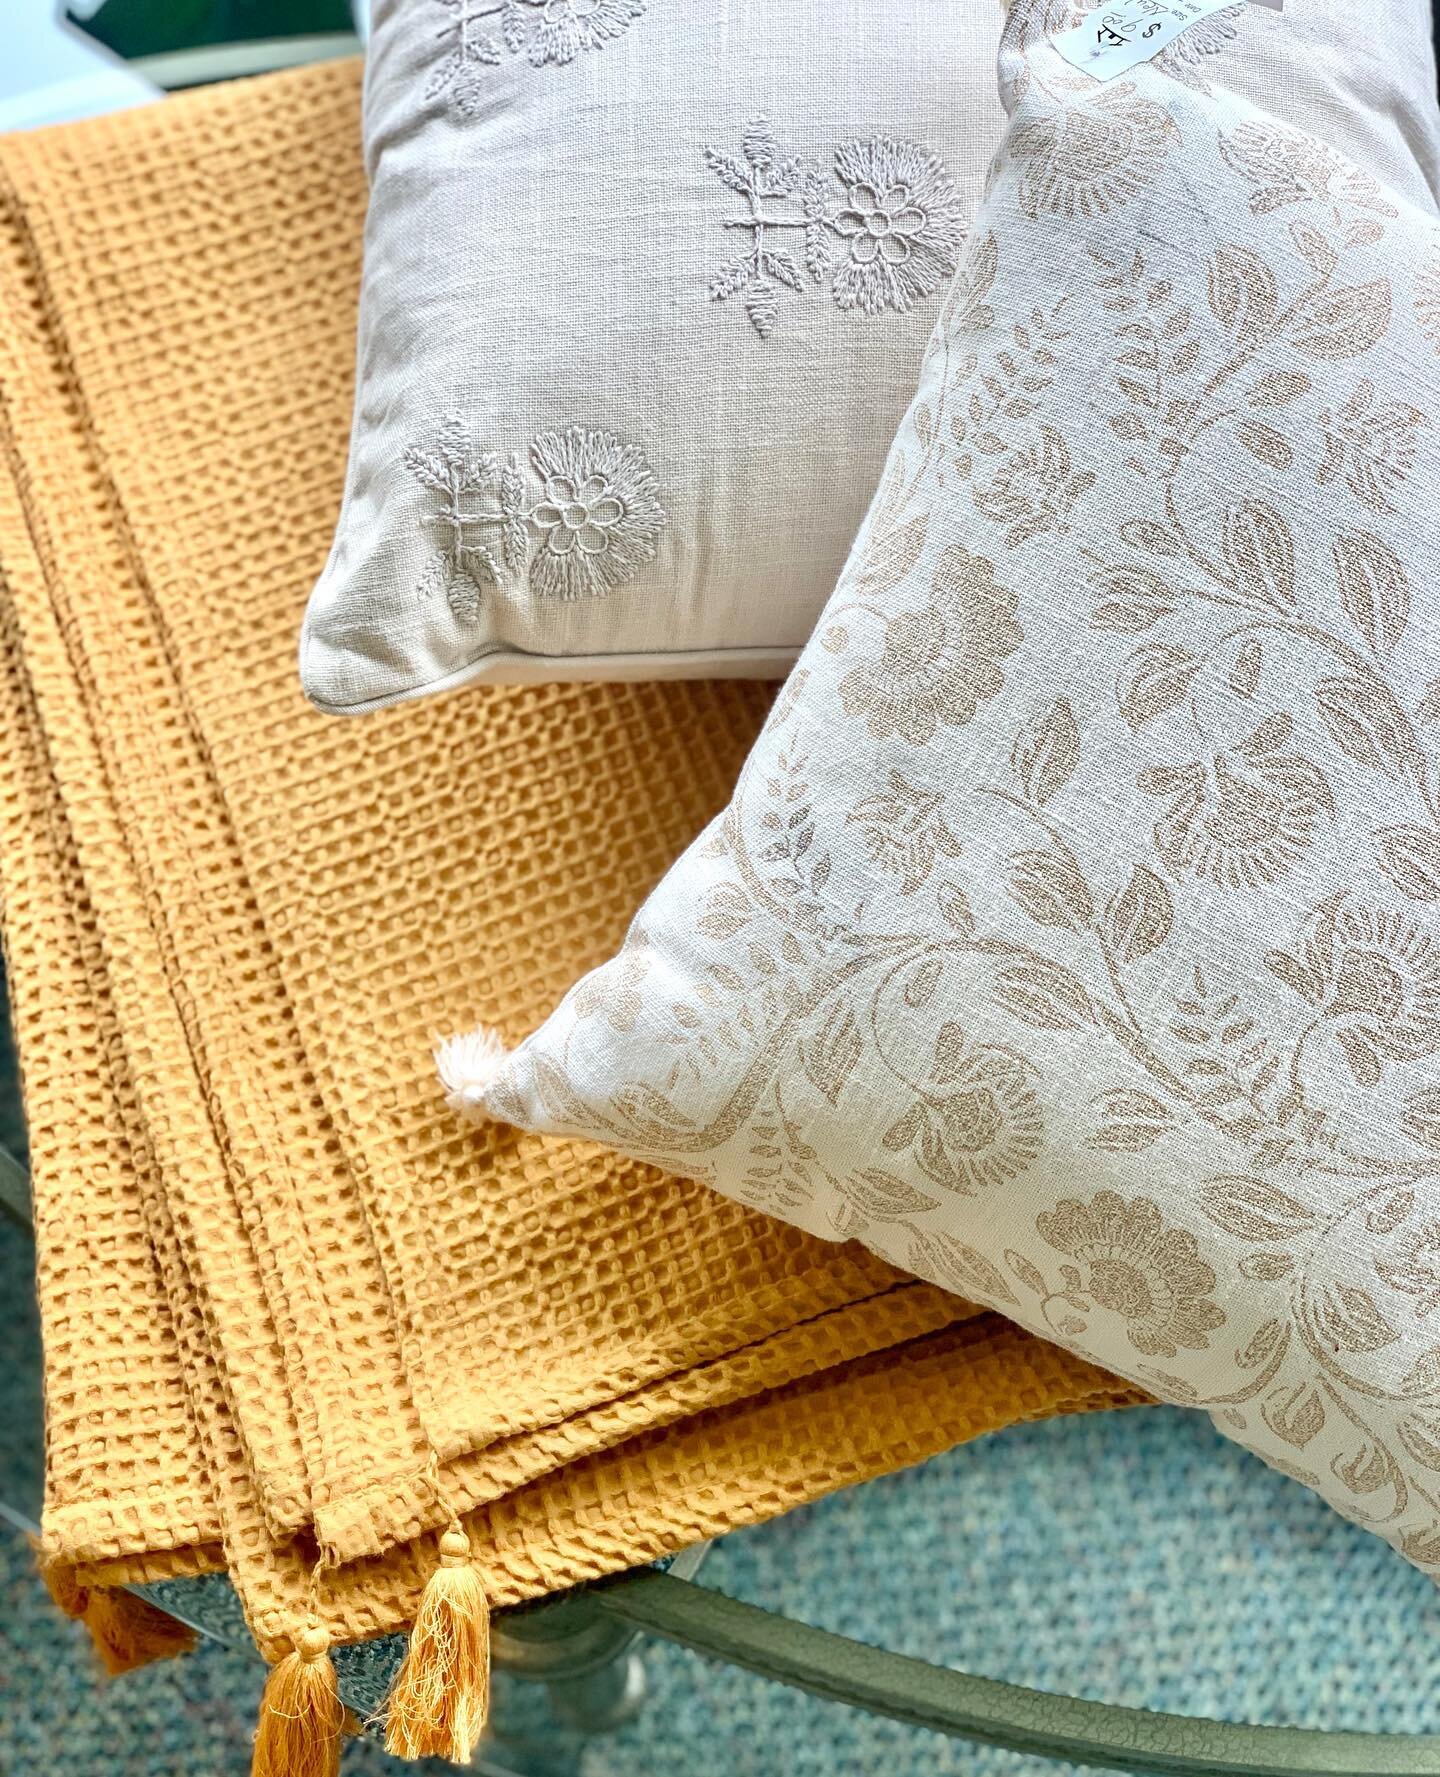 We have some great items in our linens area right now!☀️

☀️ Embroidered pillow, $11
☀️ Floral pillow (new), $9
☀️Tasseled Throw (new), $5.50